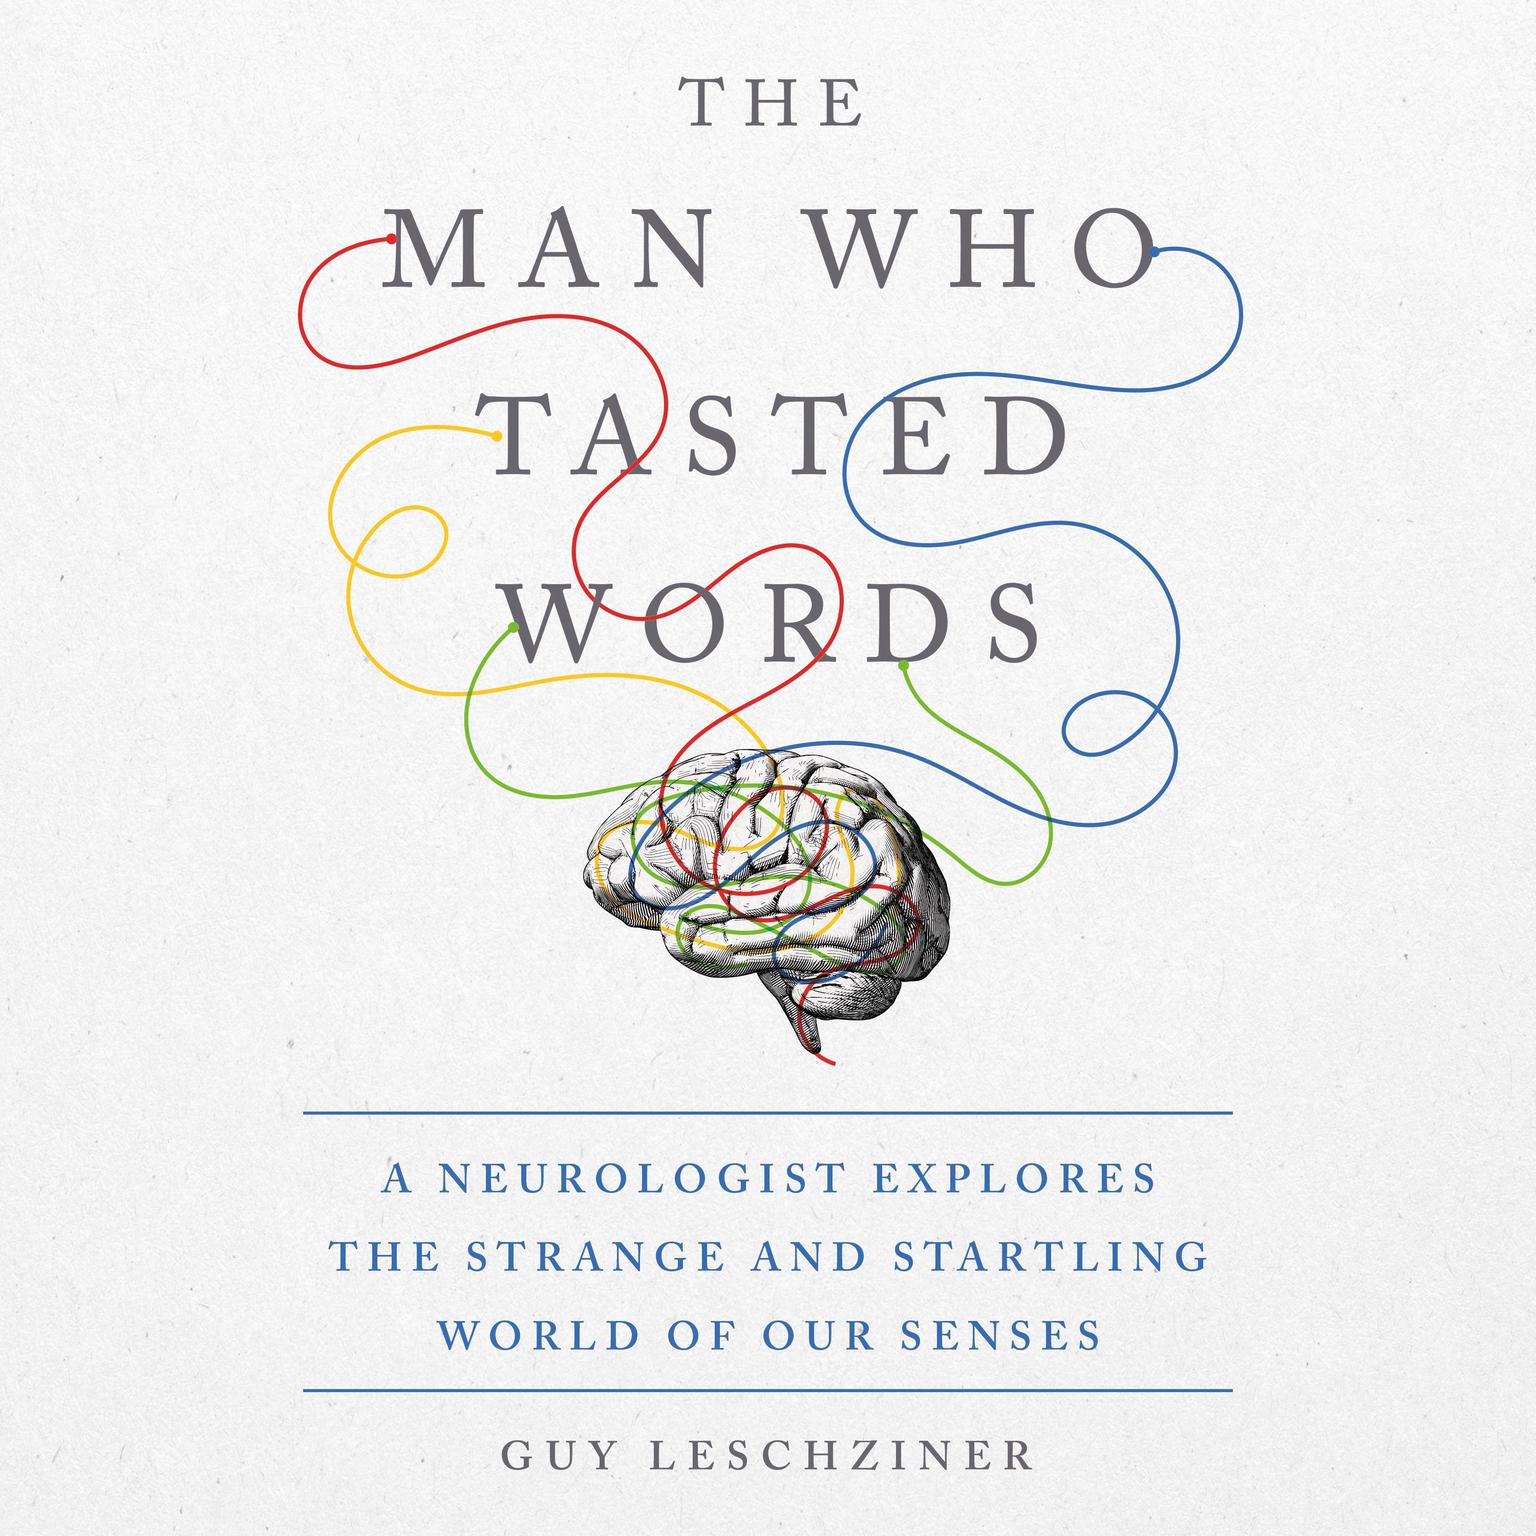 The Man Who Tasted Words: A Neurologist Explores the Strange and Startling World of Our Senses Audiobook, by Guy Leschziner